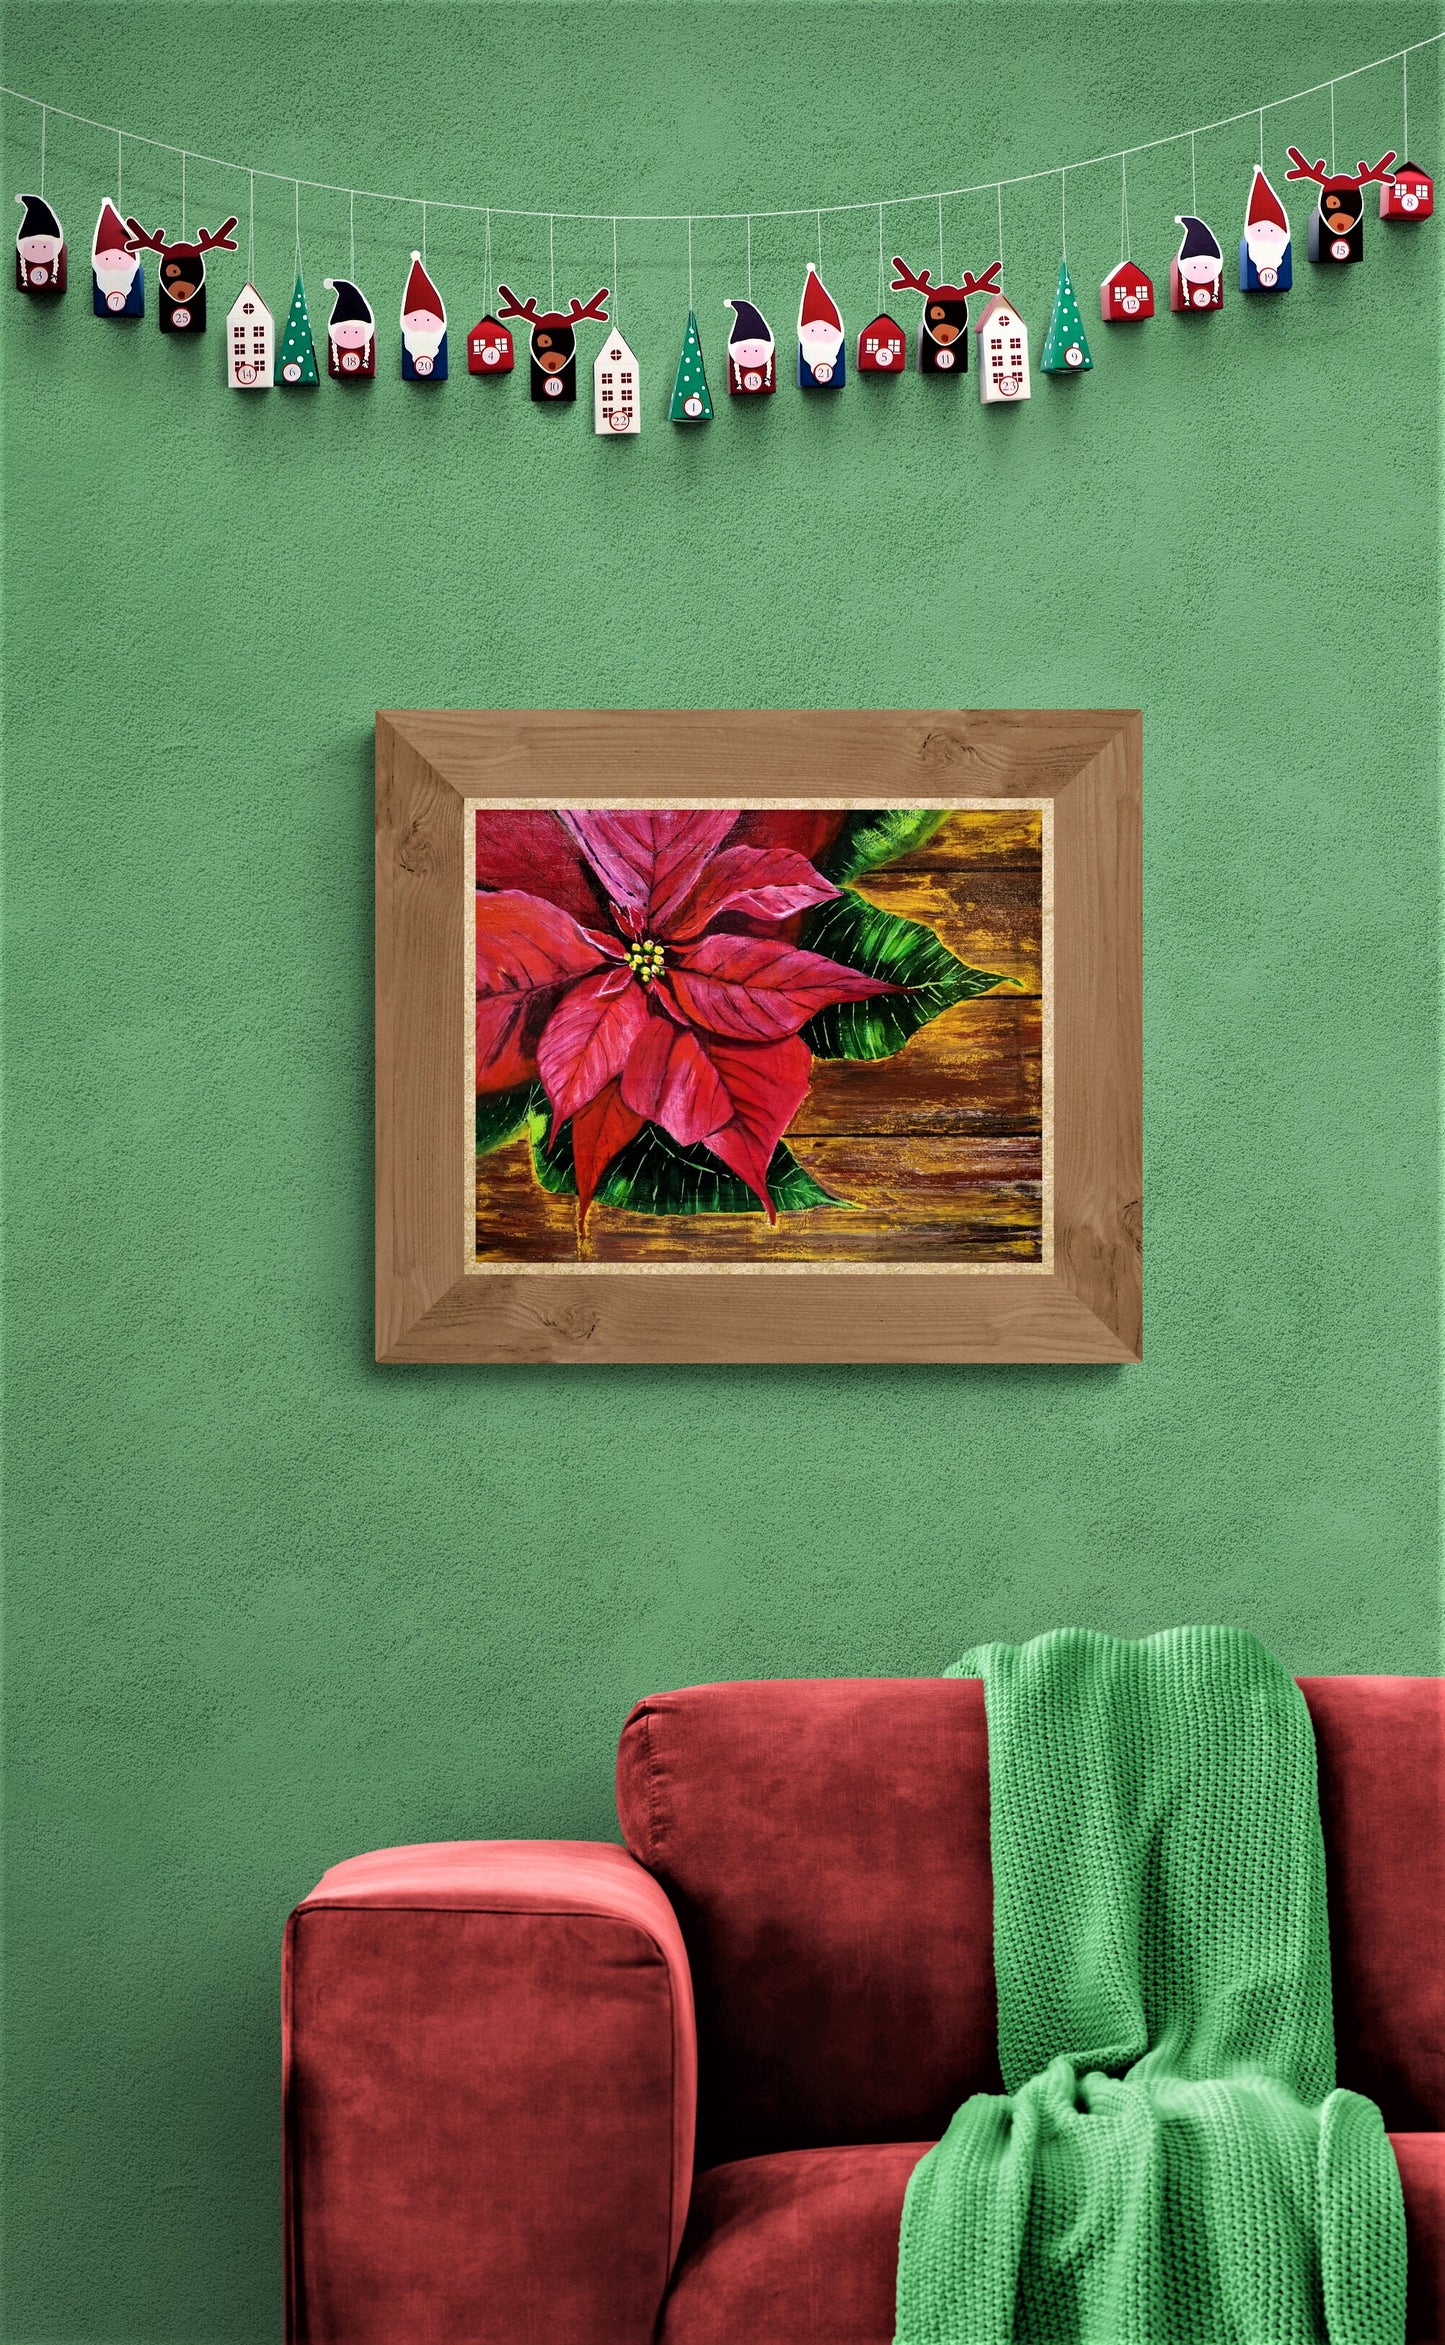 Poinsettia on Table in Living Room